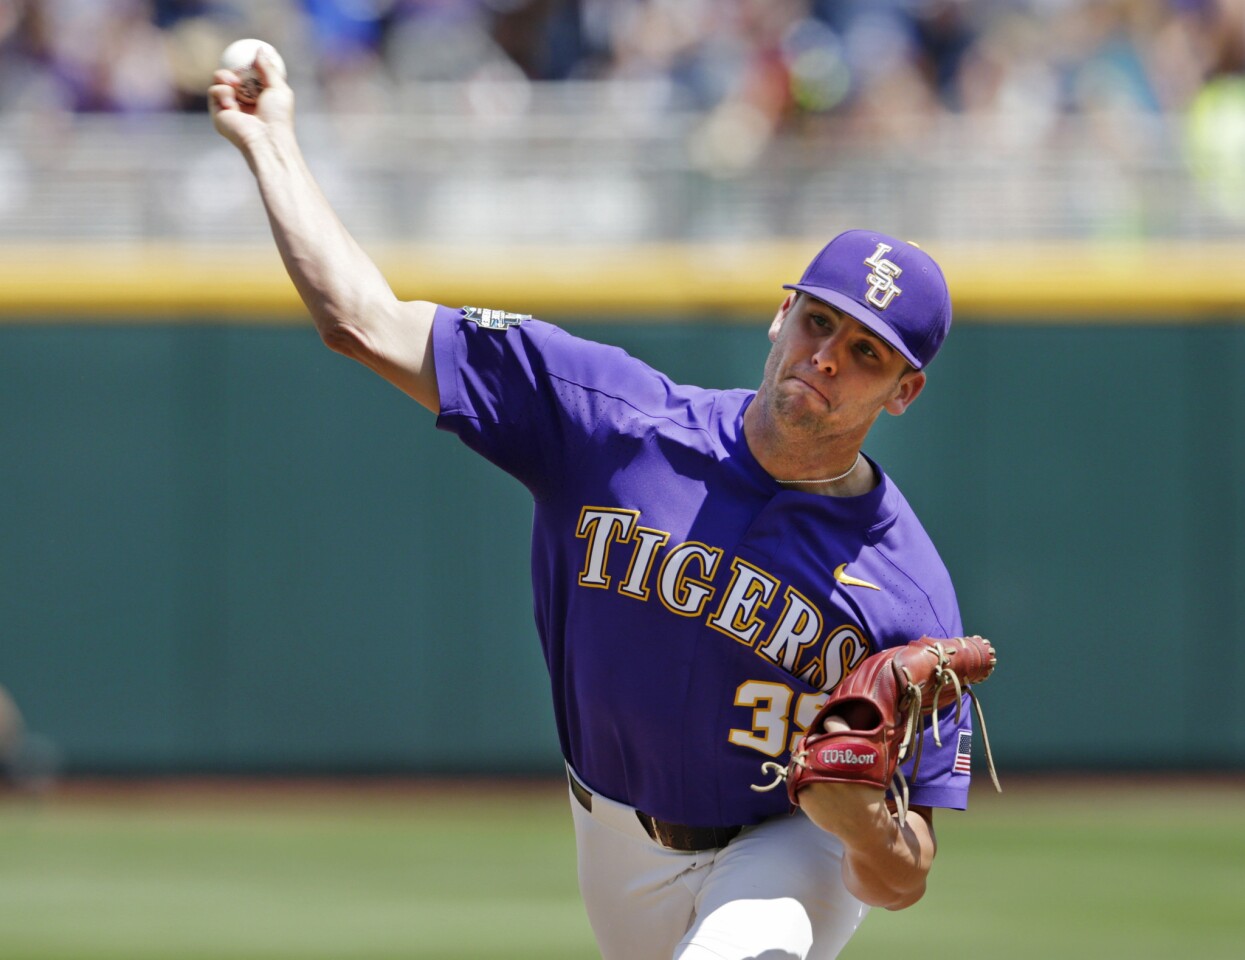 The Cubs made right-handed pitcher Lange, out of LSU, their top pick (30th overall). He's now with the Cubs' Myrtle Beach Class A+ affiliate.